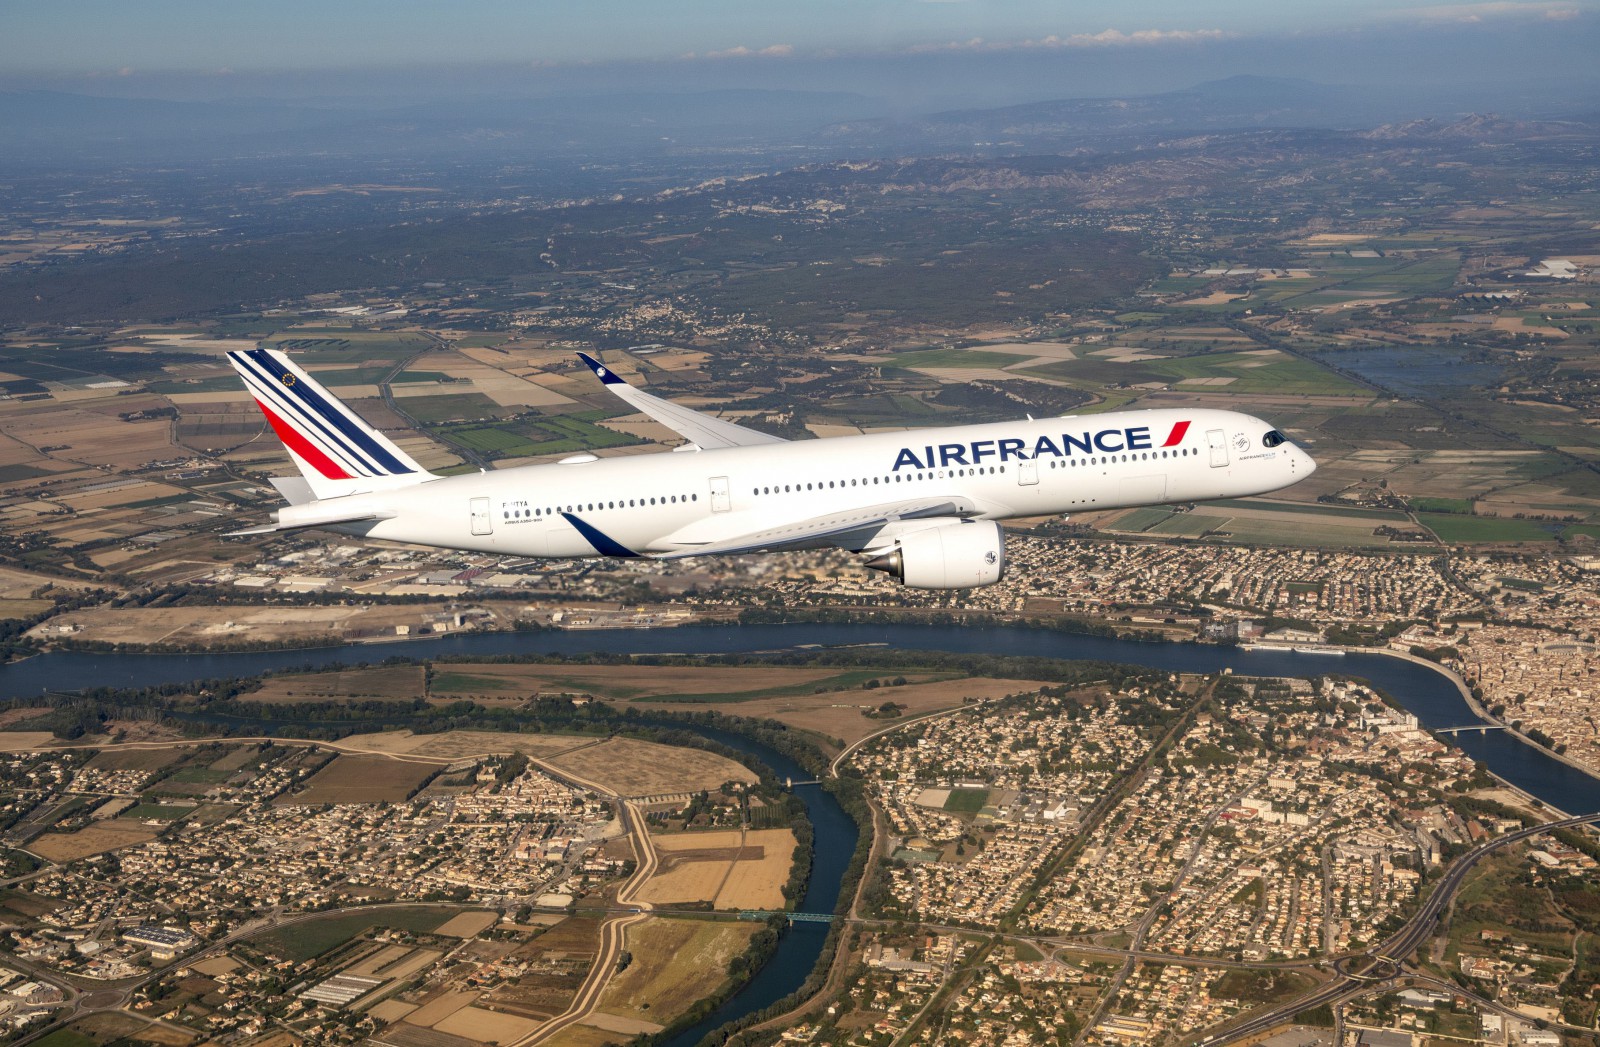 Delivery of Air France’s first A350 XWB